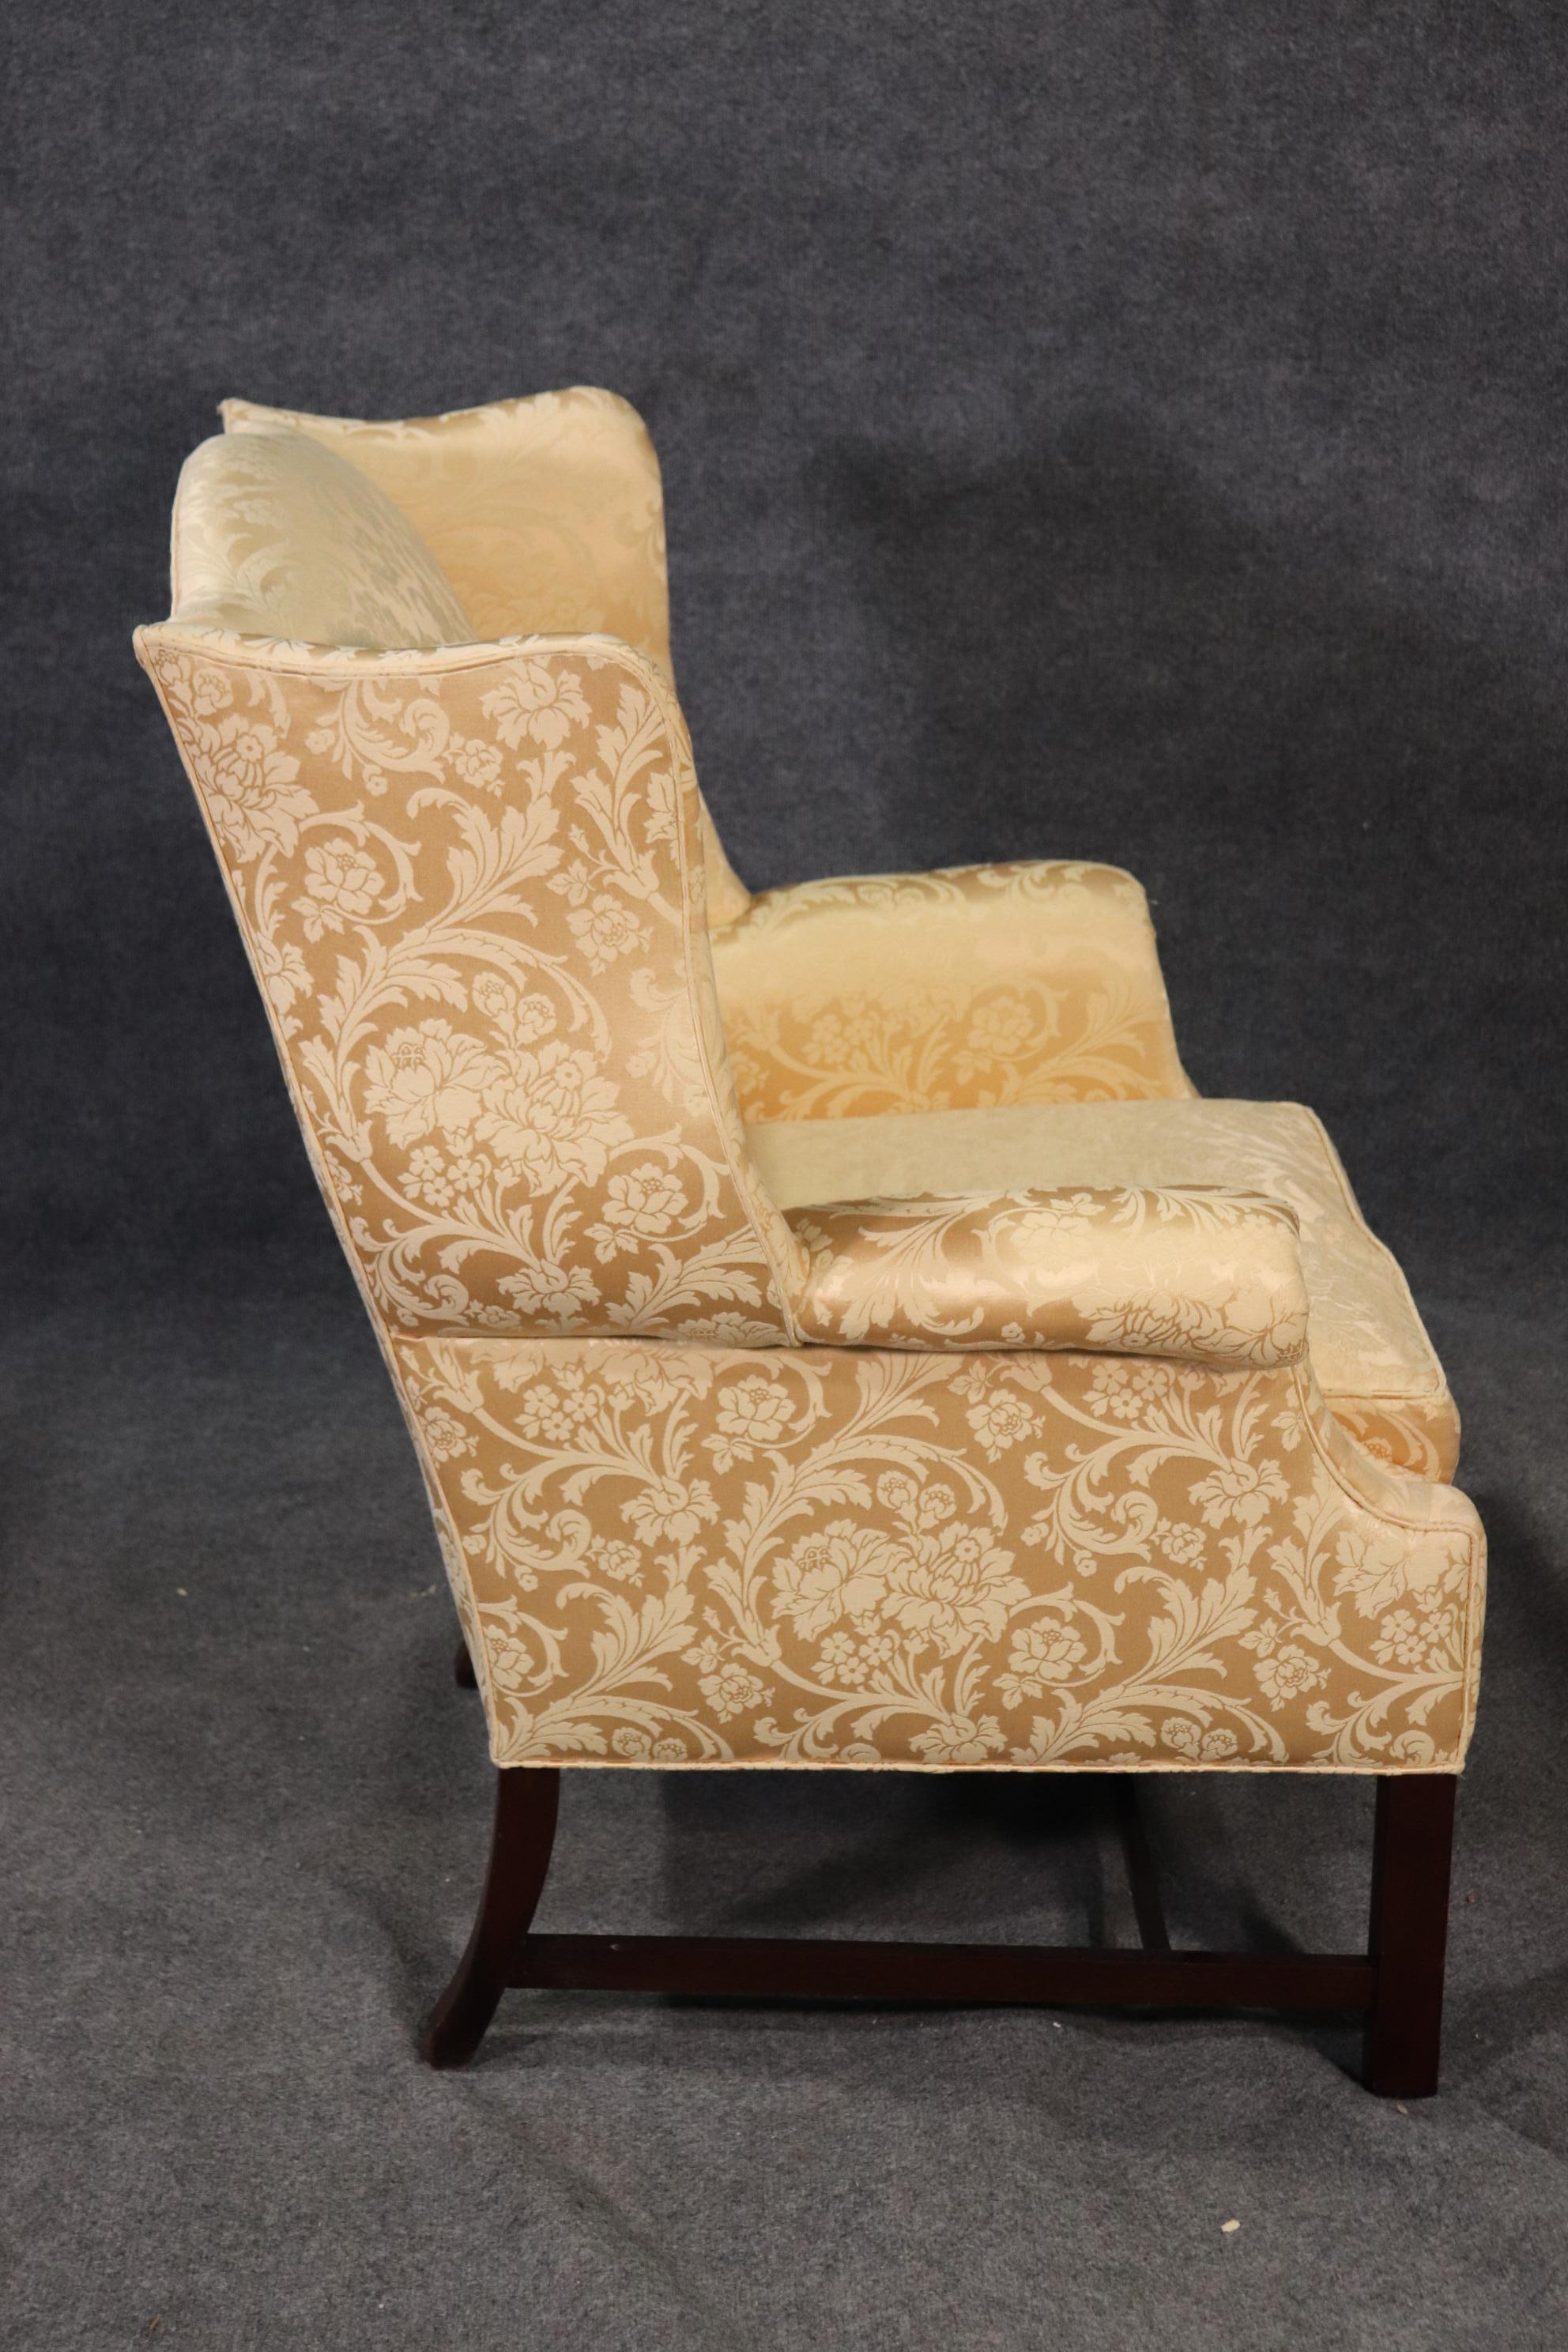 American Newport Style Solid Mahogany Wing Chair by Hickory Chair Company